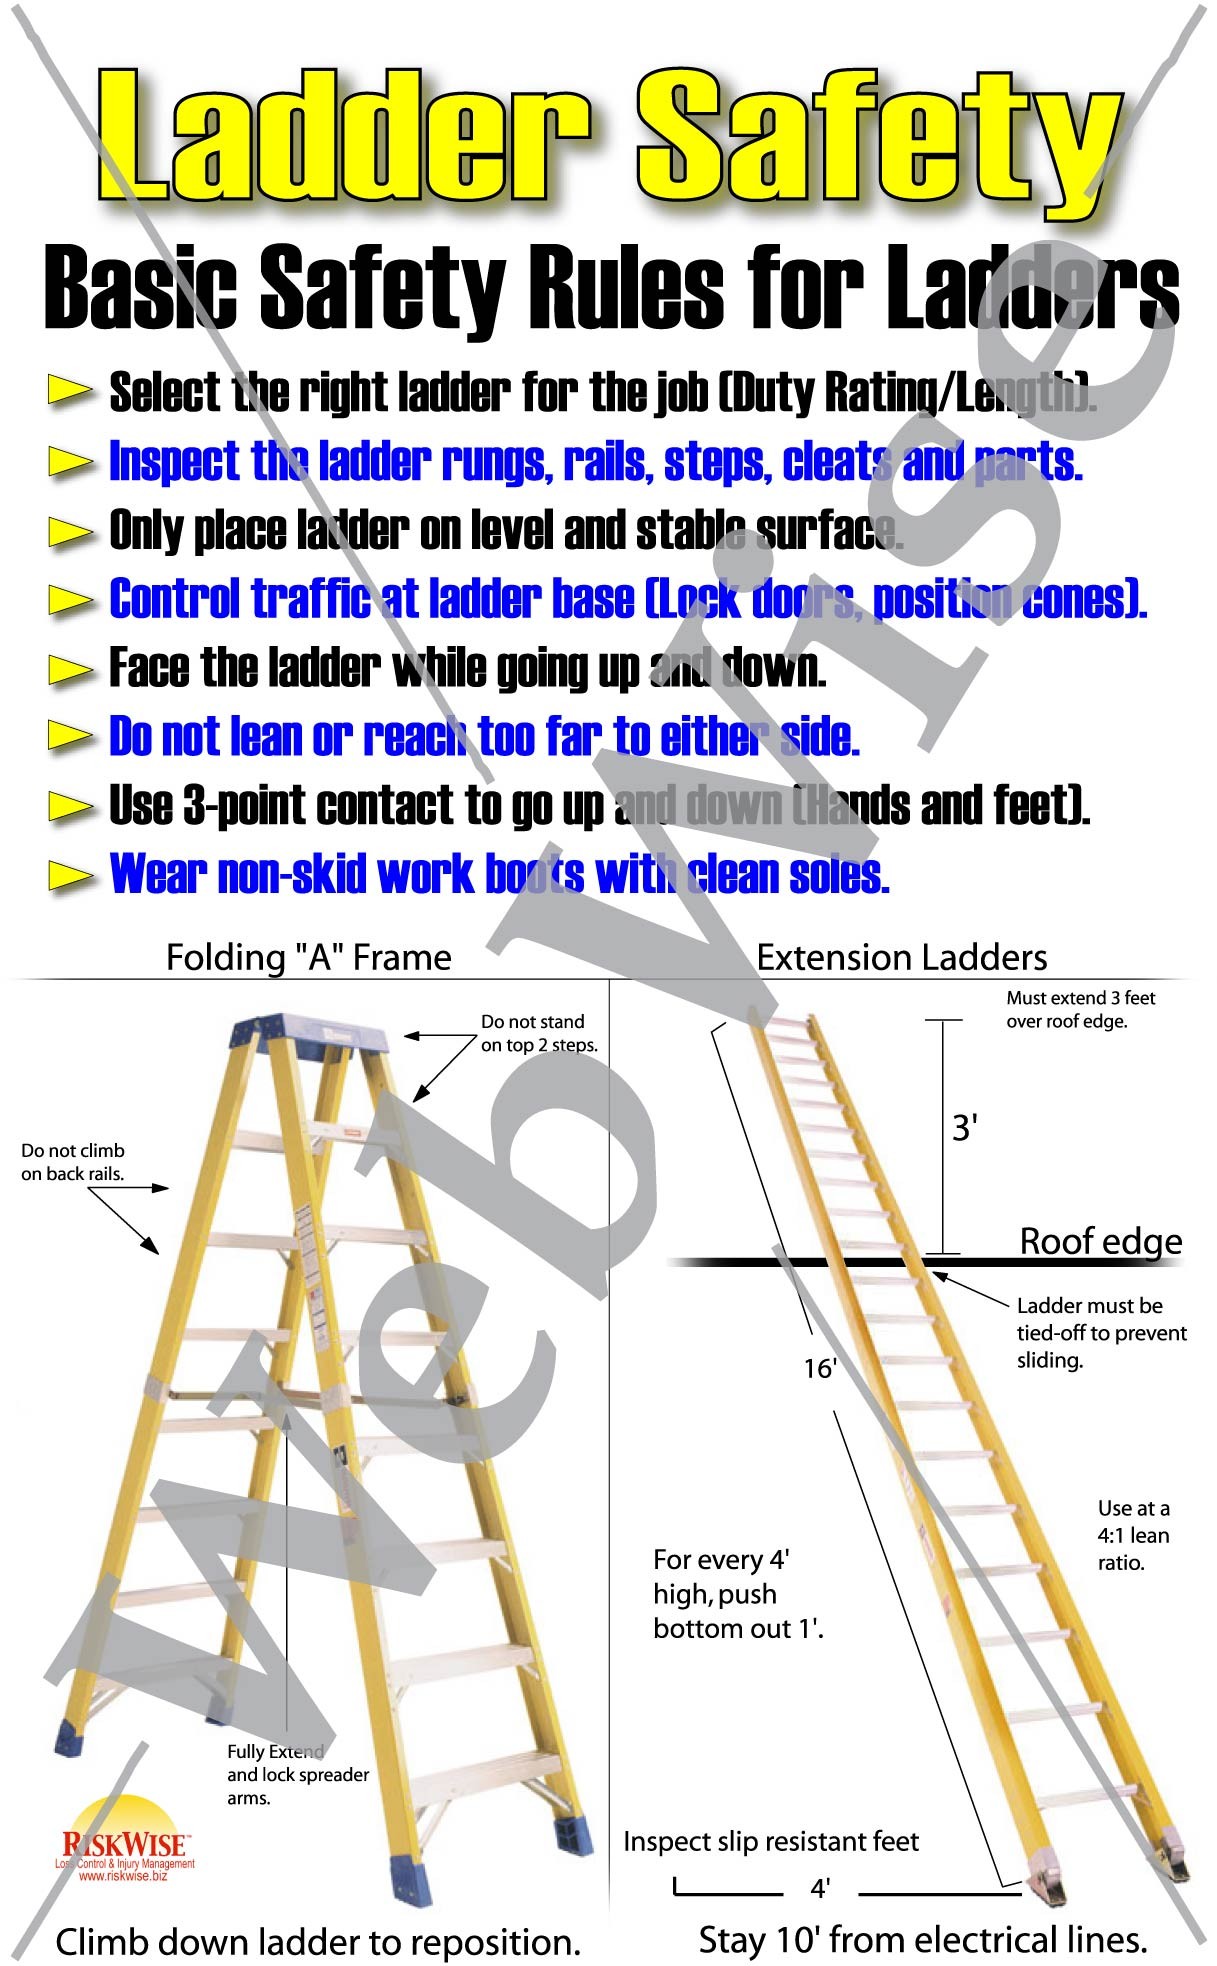 Looking to Buy a Sturdy, Safe Ladder. Consider Wolfwise